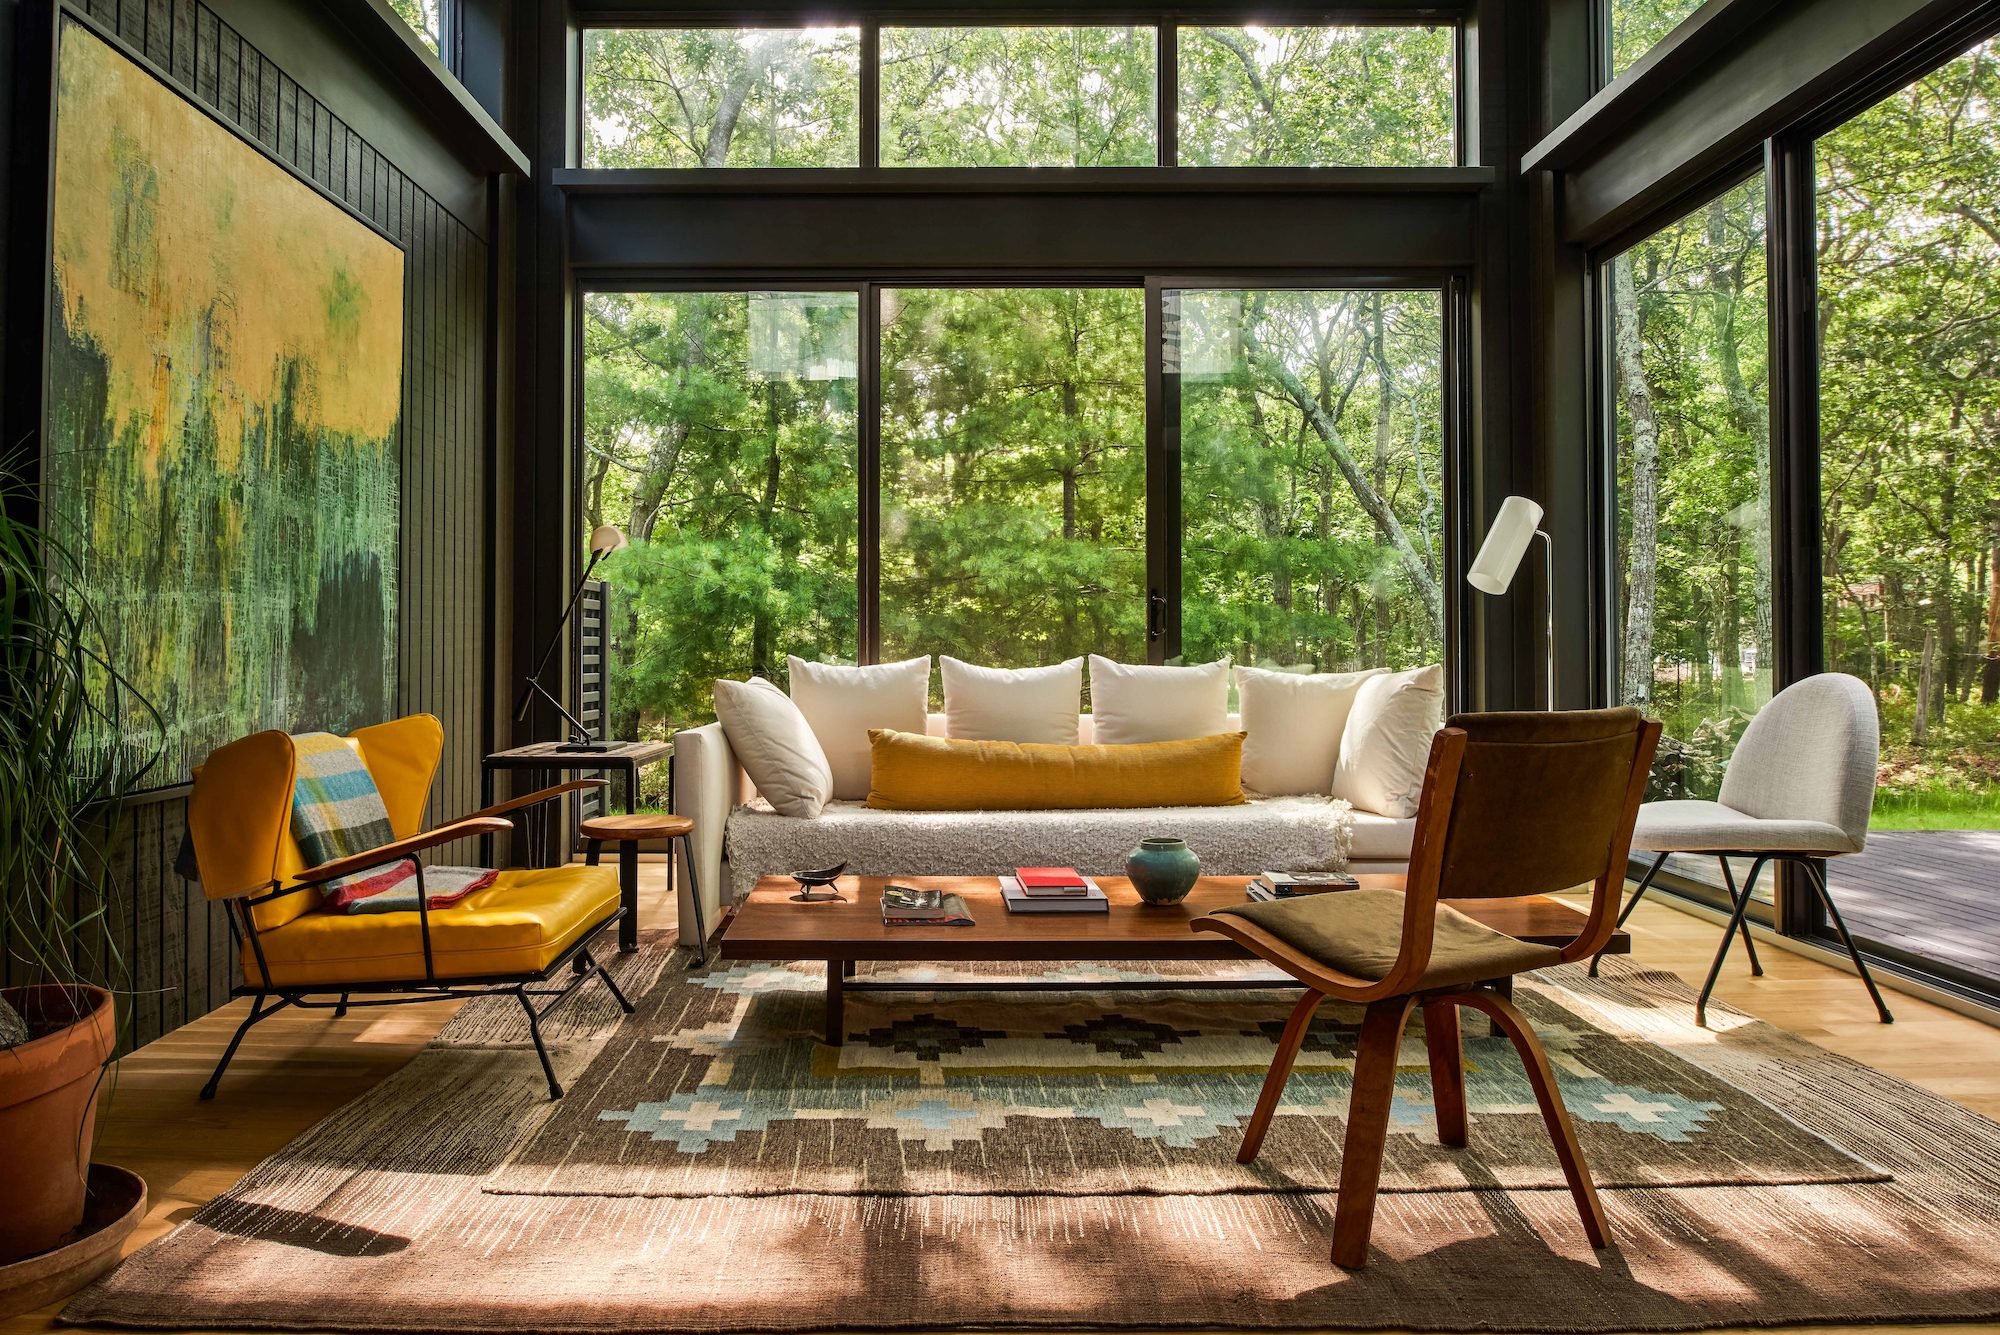 Interior design photography by Michael Mundy, showing a mid-century styled house in the Hamptons - Effect Magazine